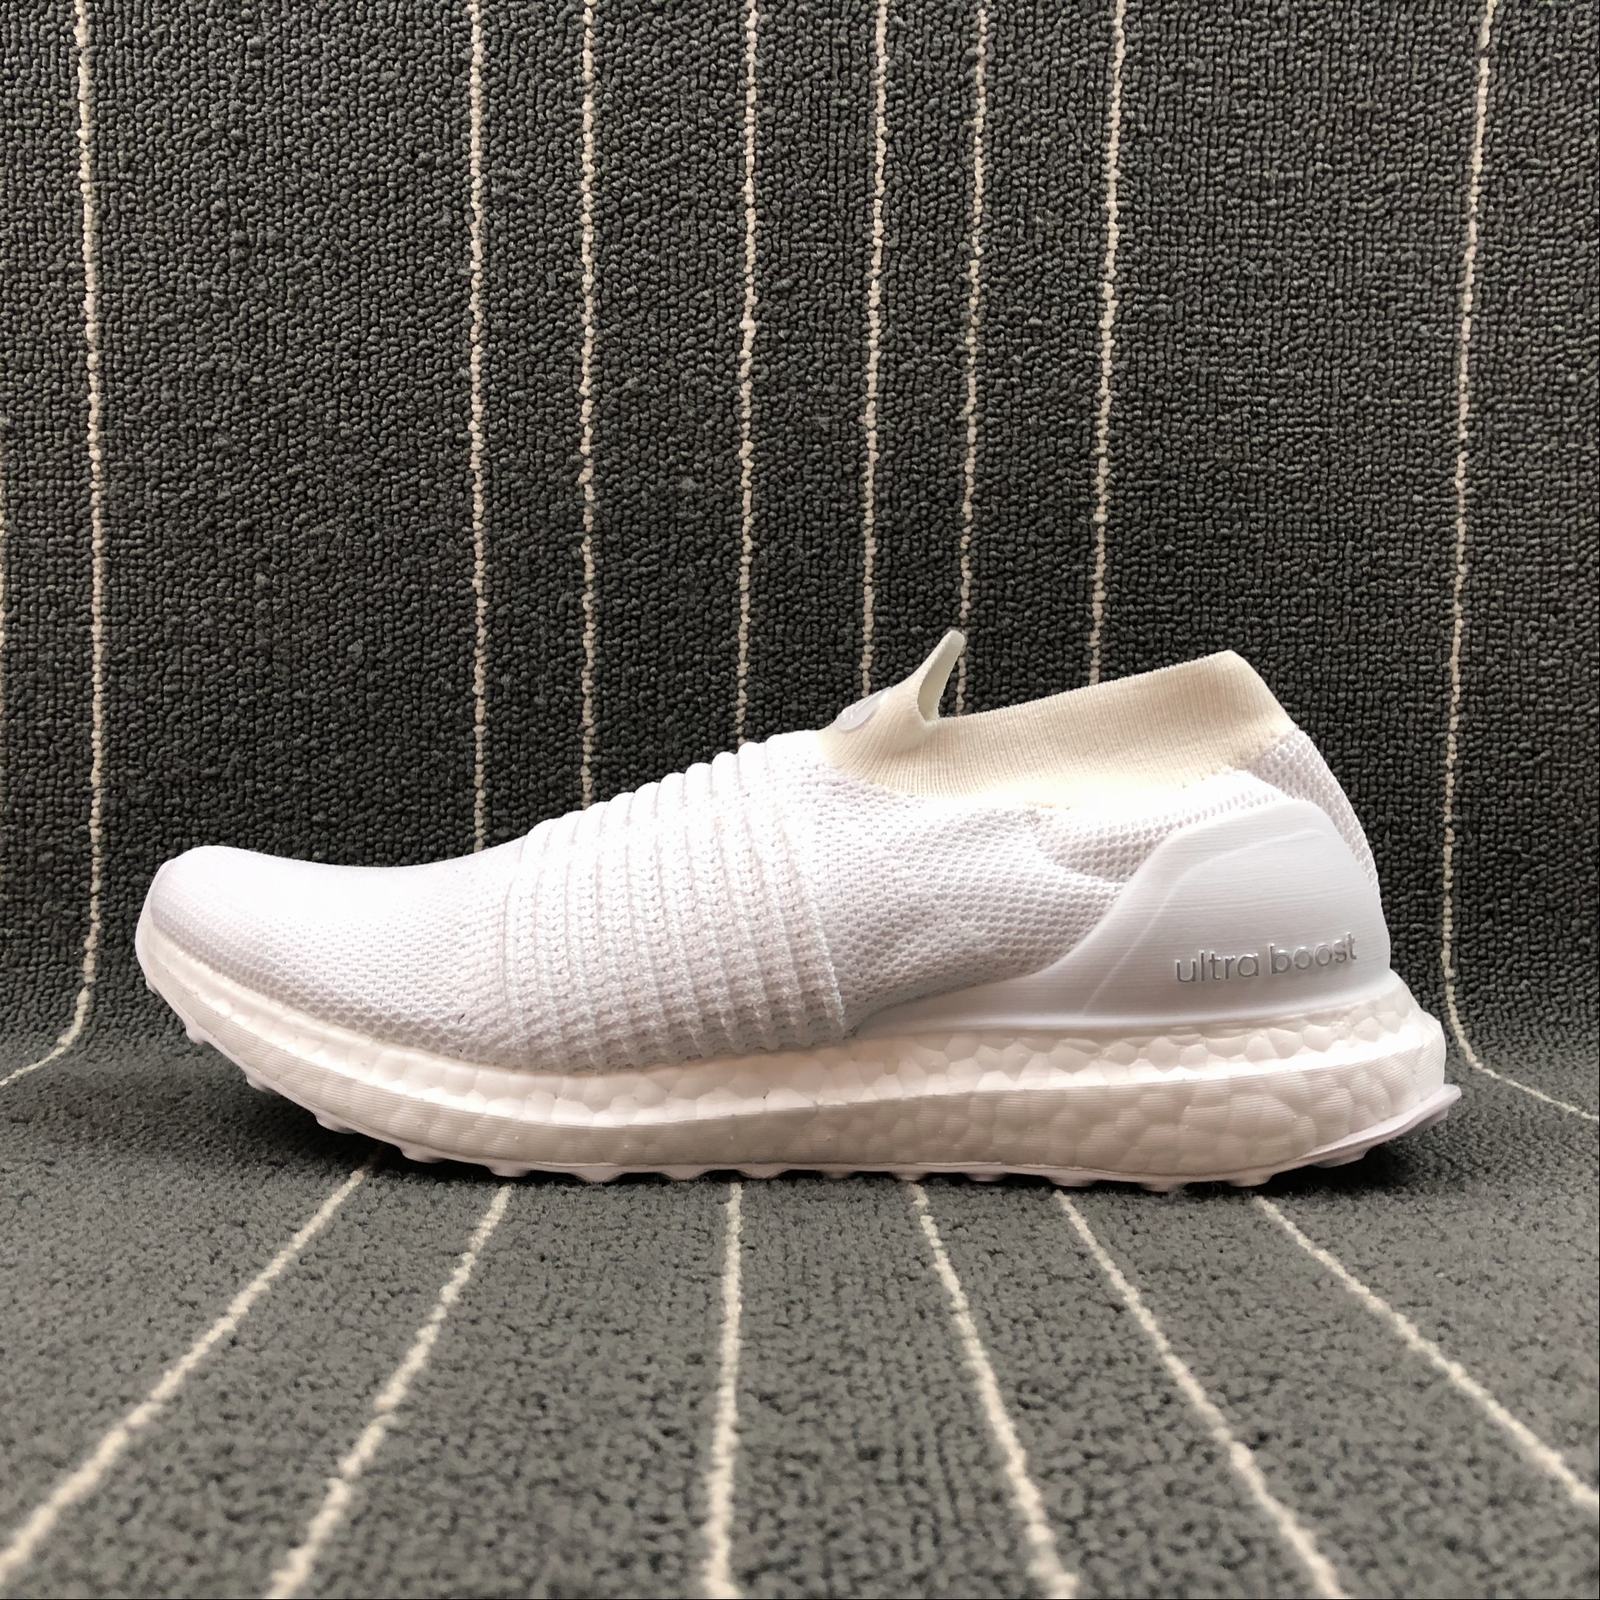 laceless ultra boost white